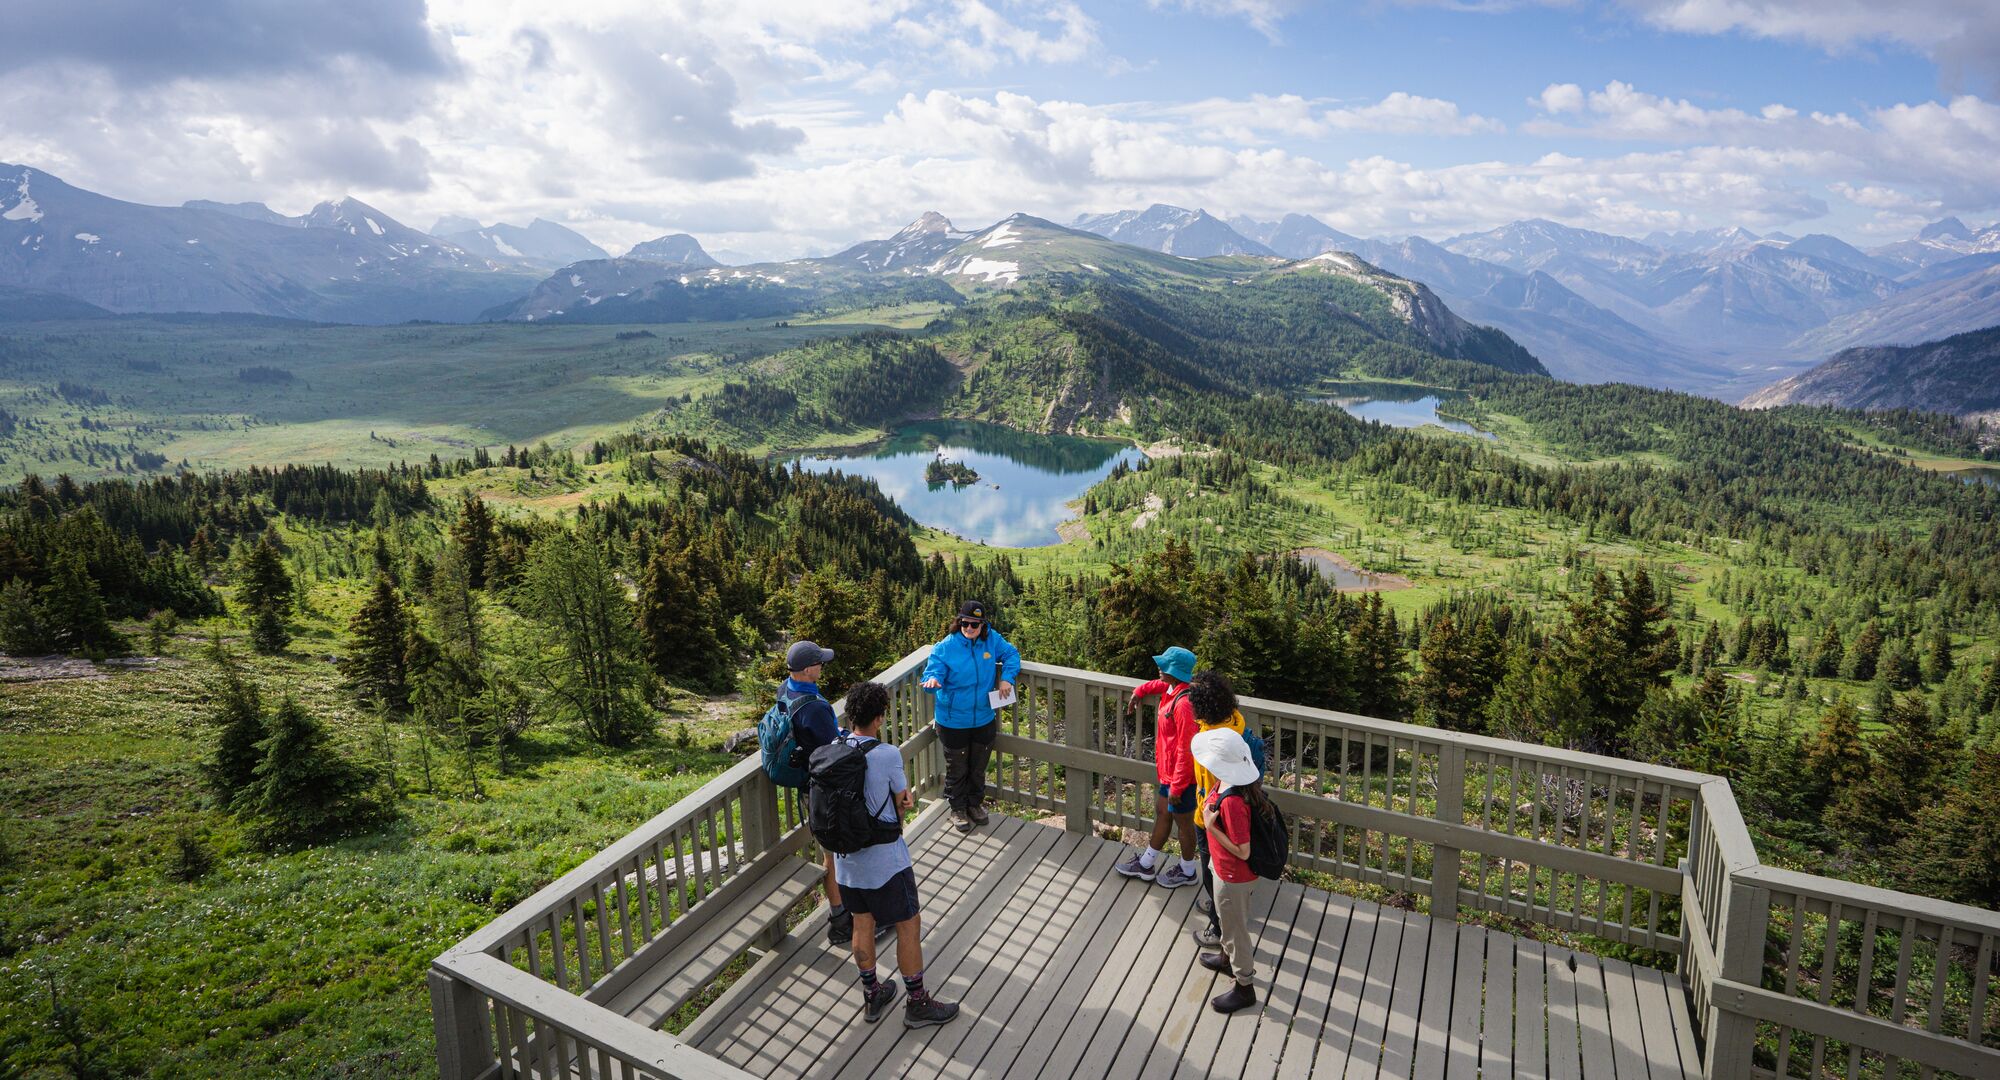 A group of people stand at a viewing deck at Sunshine Meadows overlooking alpine lakes and peaks in Sunshine Meadows